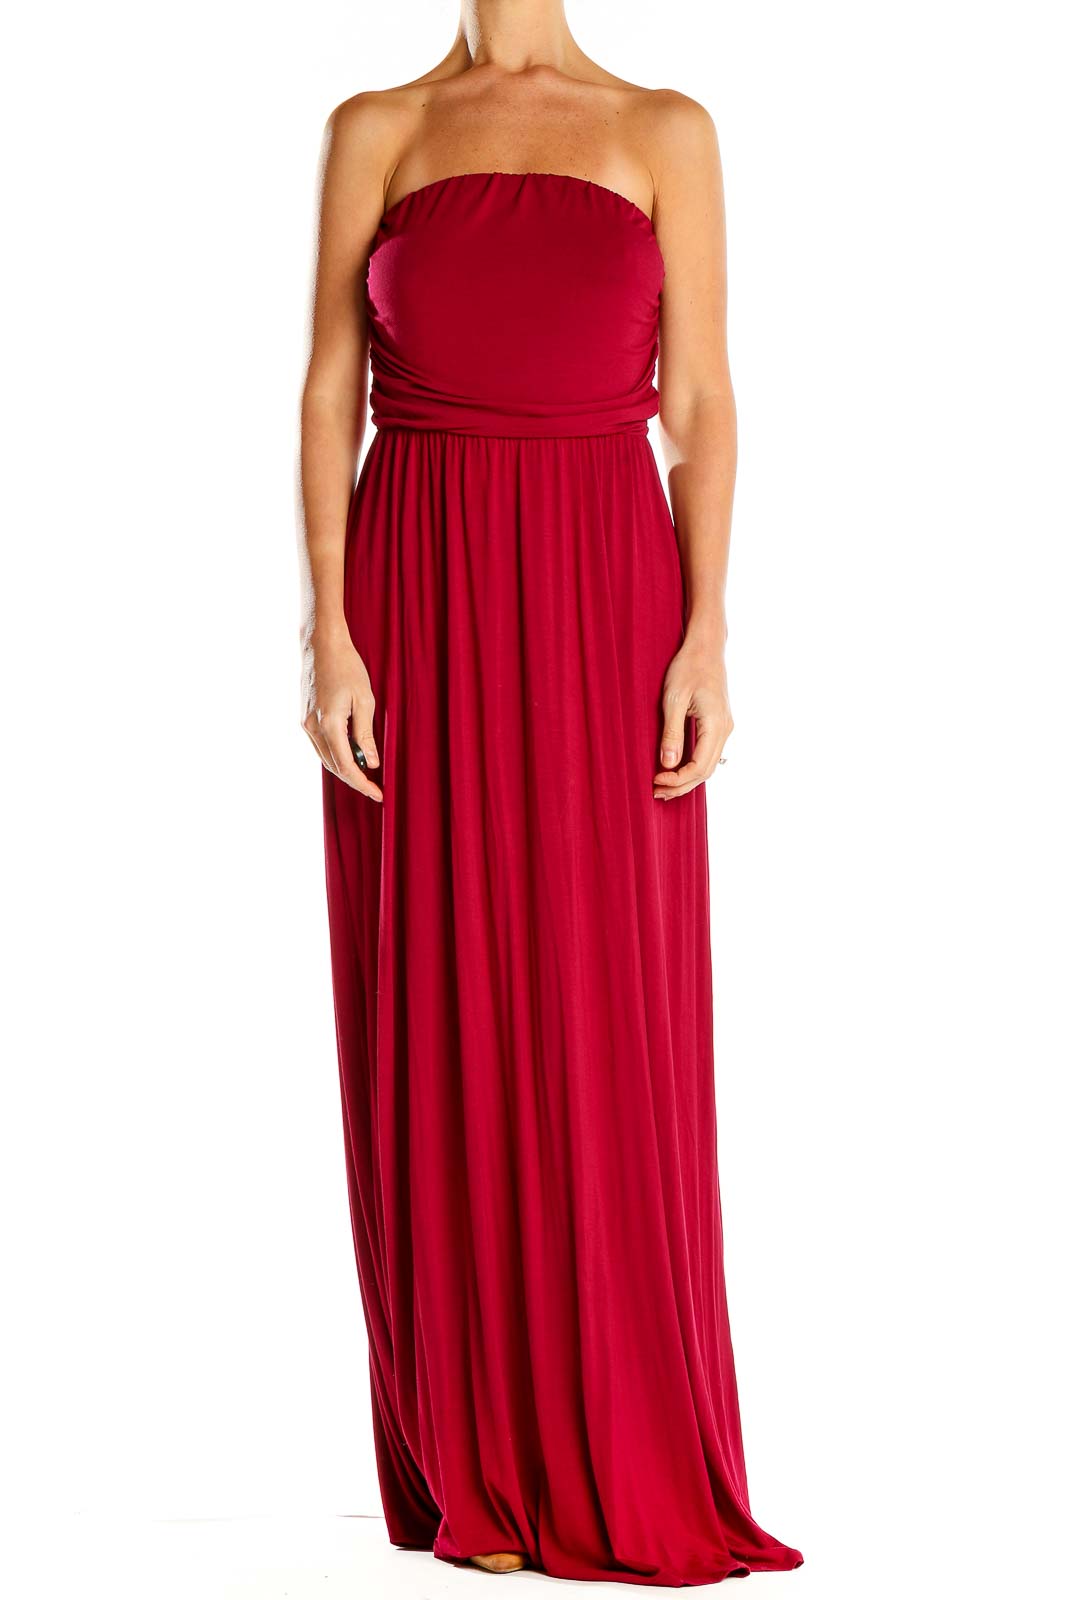 Red Strapless Maxi Dress Front